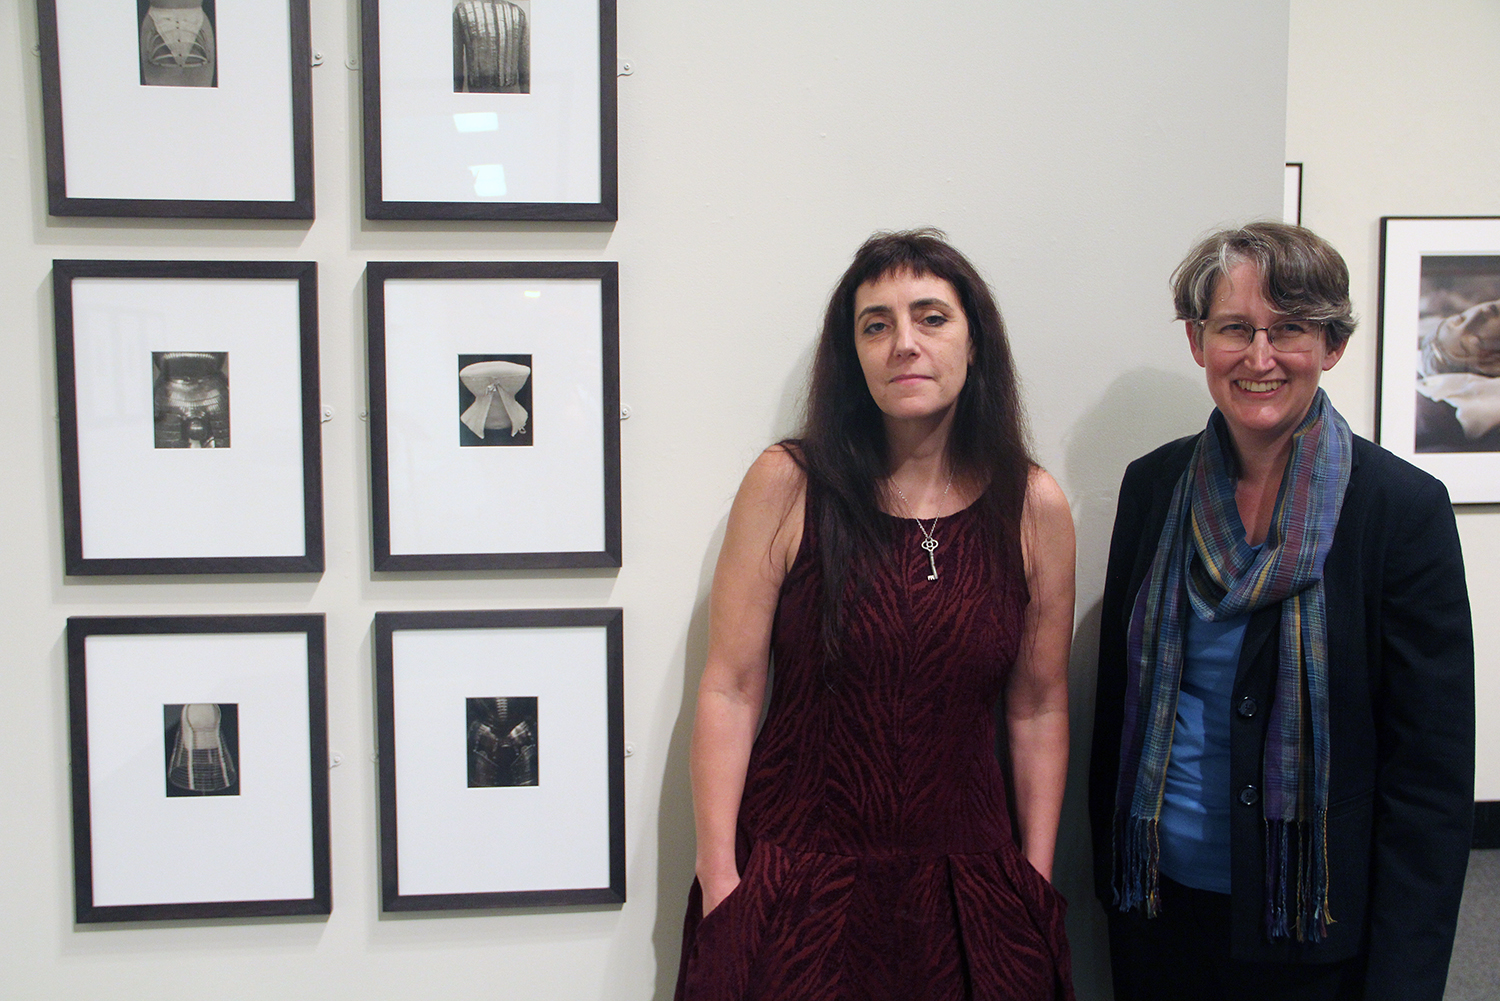 On Sept. 29, Artist Tanya Marcuse, at left, spoke about her exhibit, Phantom Bodies, on display at the Davison Art Center through Dec. 19. Pictured at right is DAC Curator Clare Rogan.